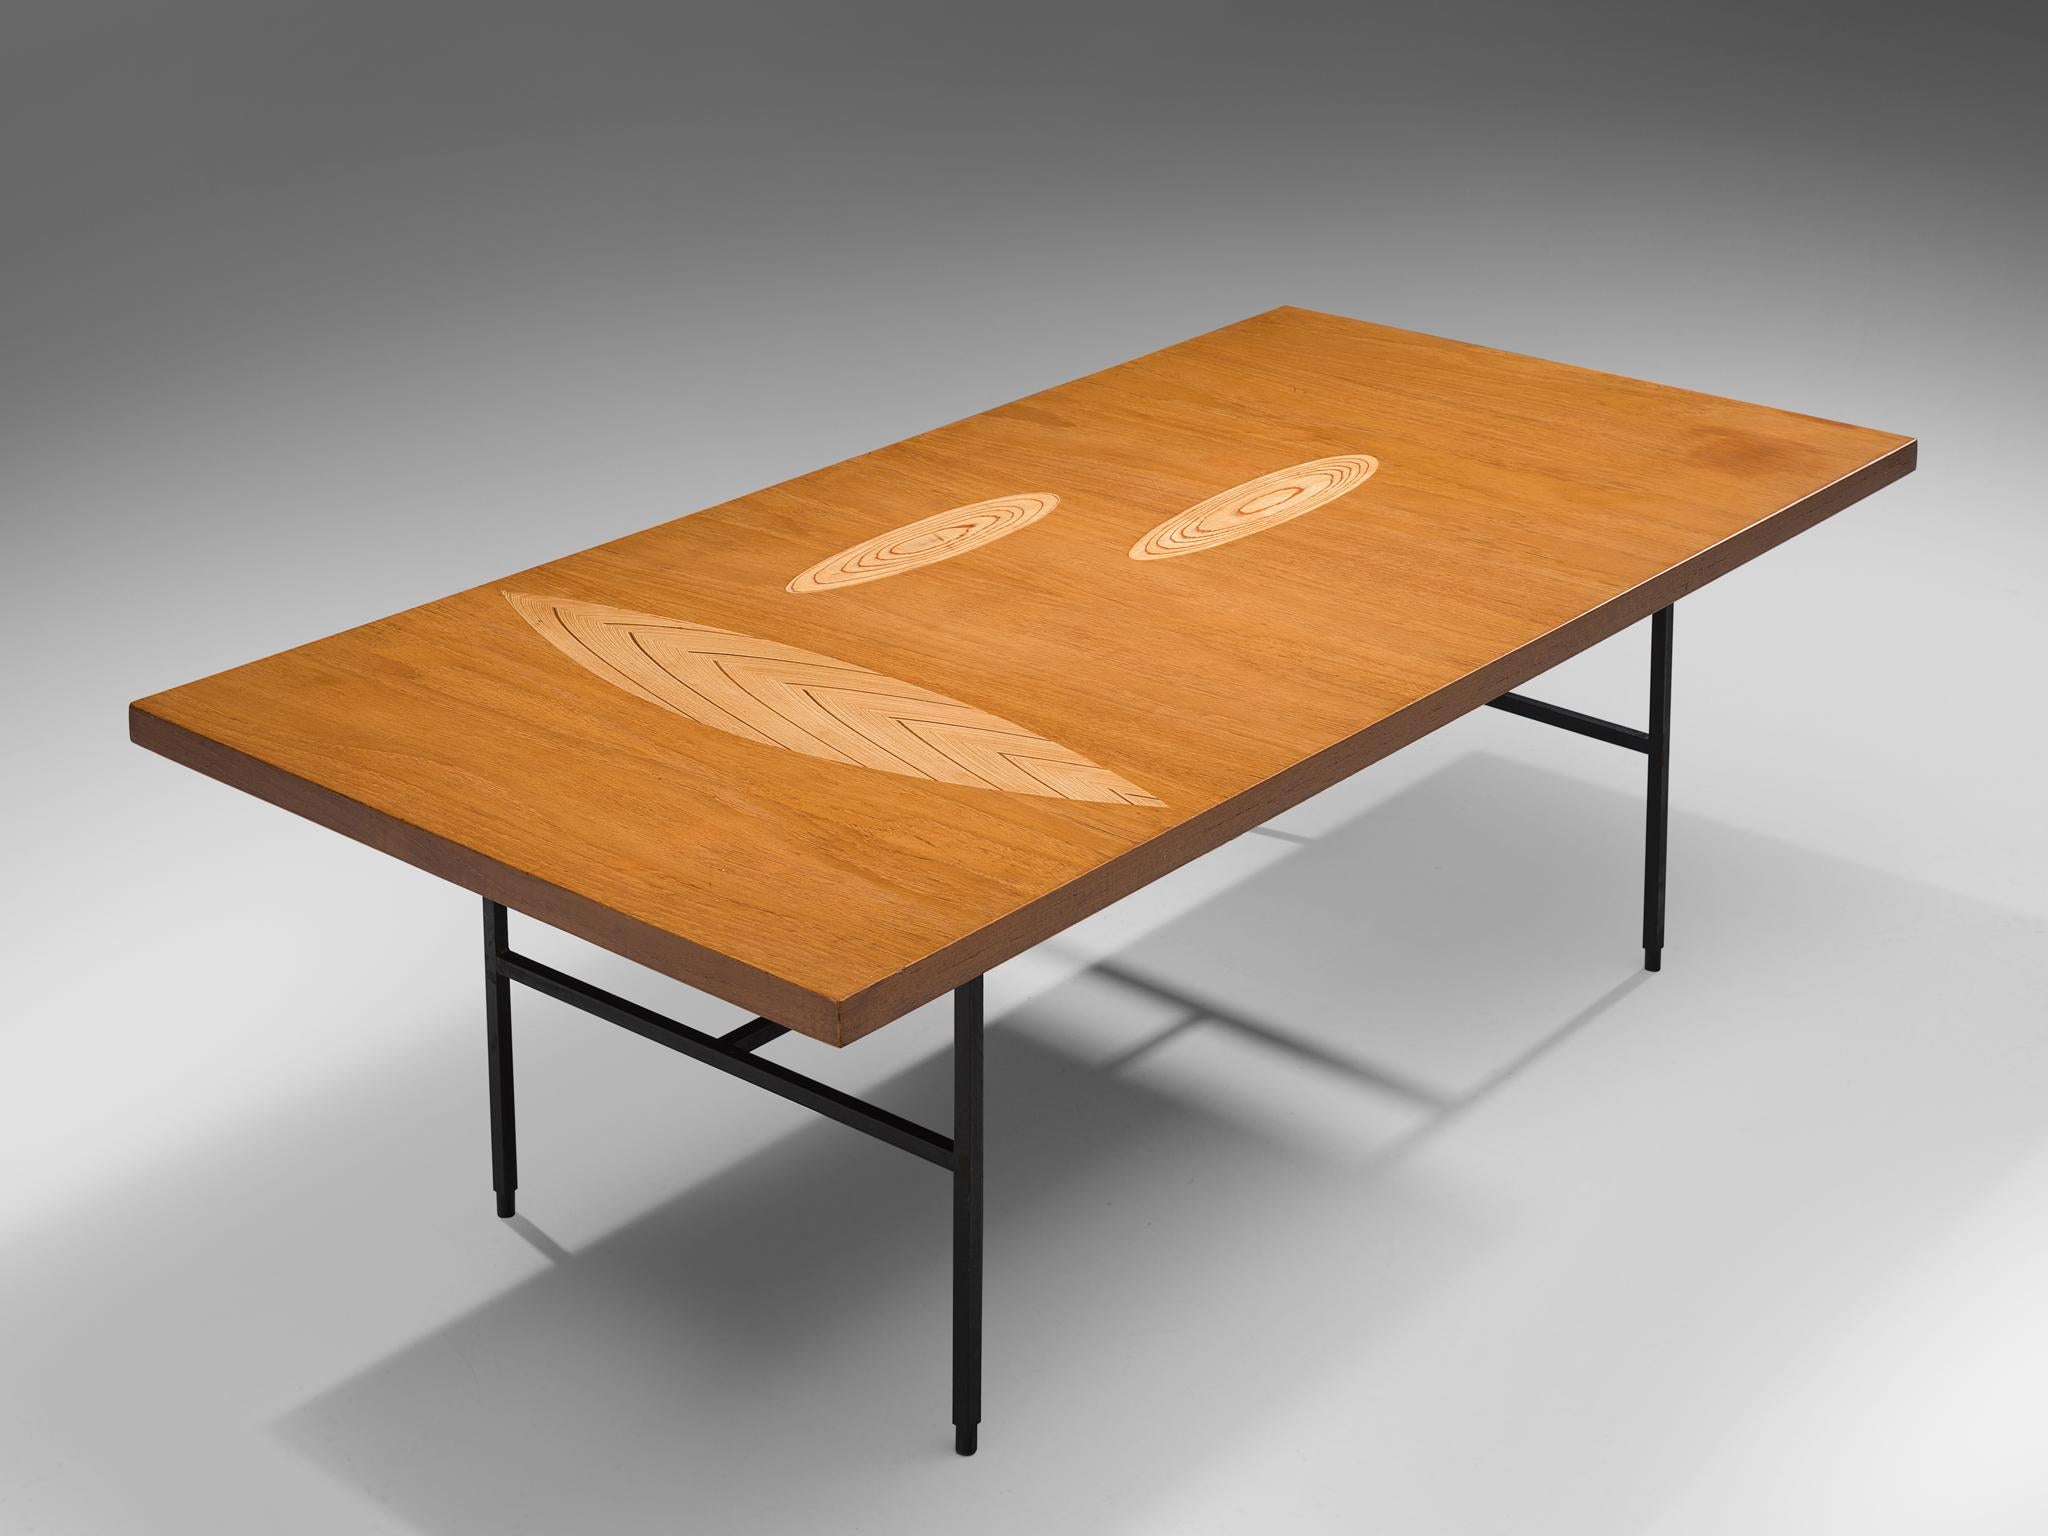 Tapio Wirkkala for Asko, cocktail table in oak and metal, Finland, 1960s.

Coffee table with wooden inlay ornaments designed by Tapio Wirkala. The table is produced by Asko. This coffee table is one of Wirkkala's iconic furniture designs. Made with